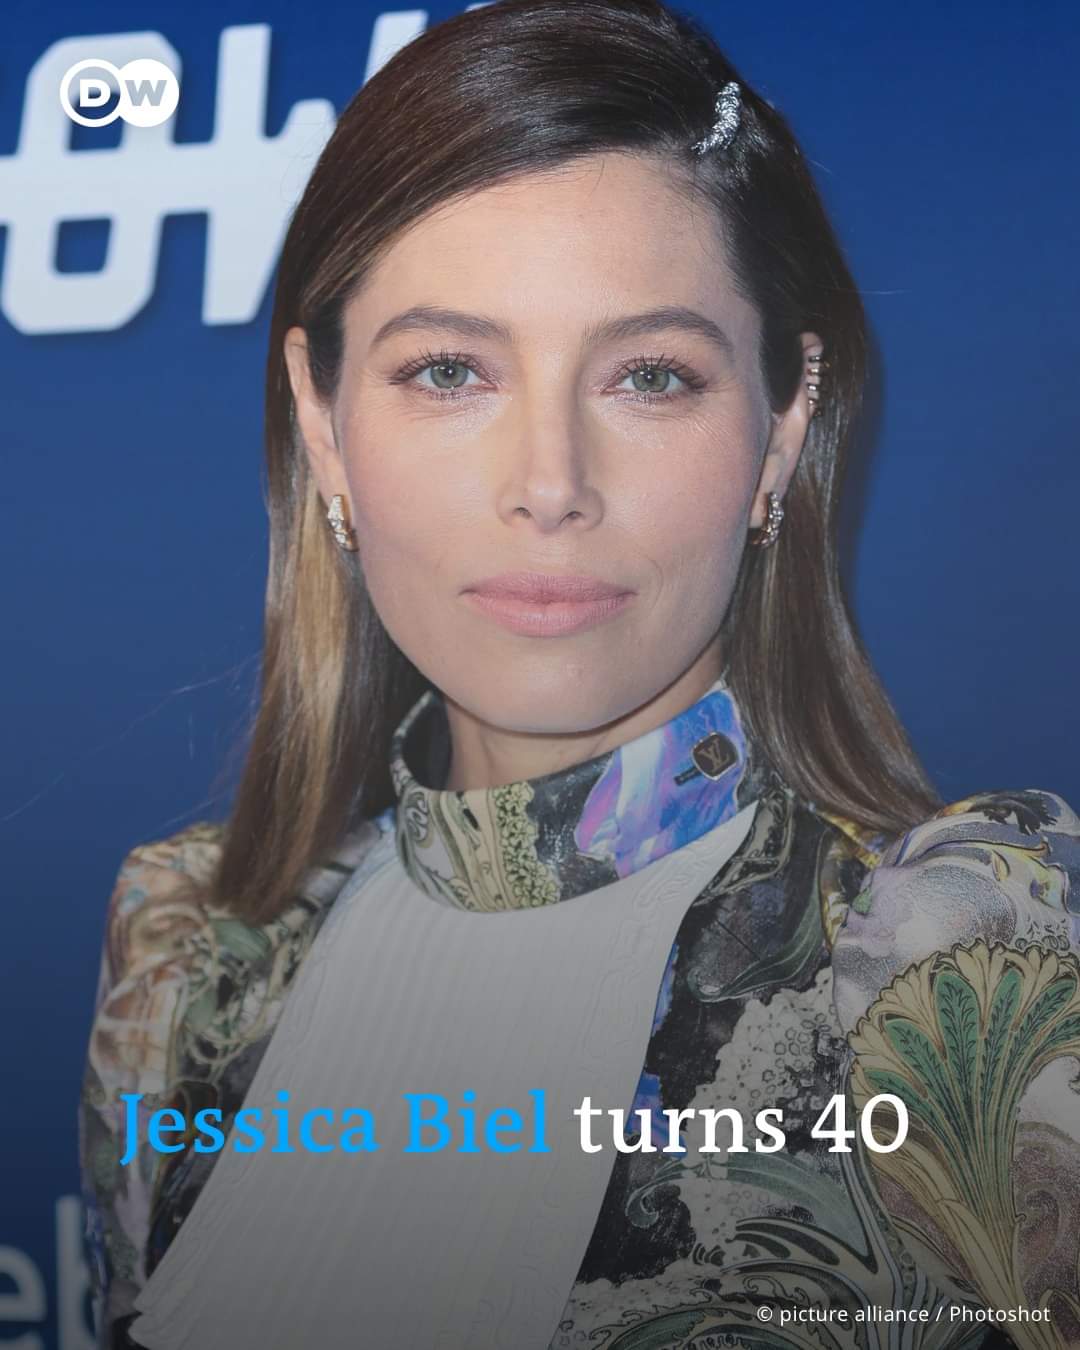 Happy Birthday  delated Jessica Biel. My best Wishes for you. 